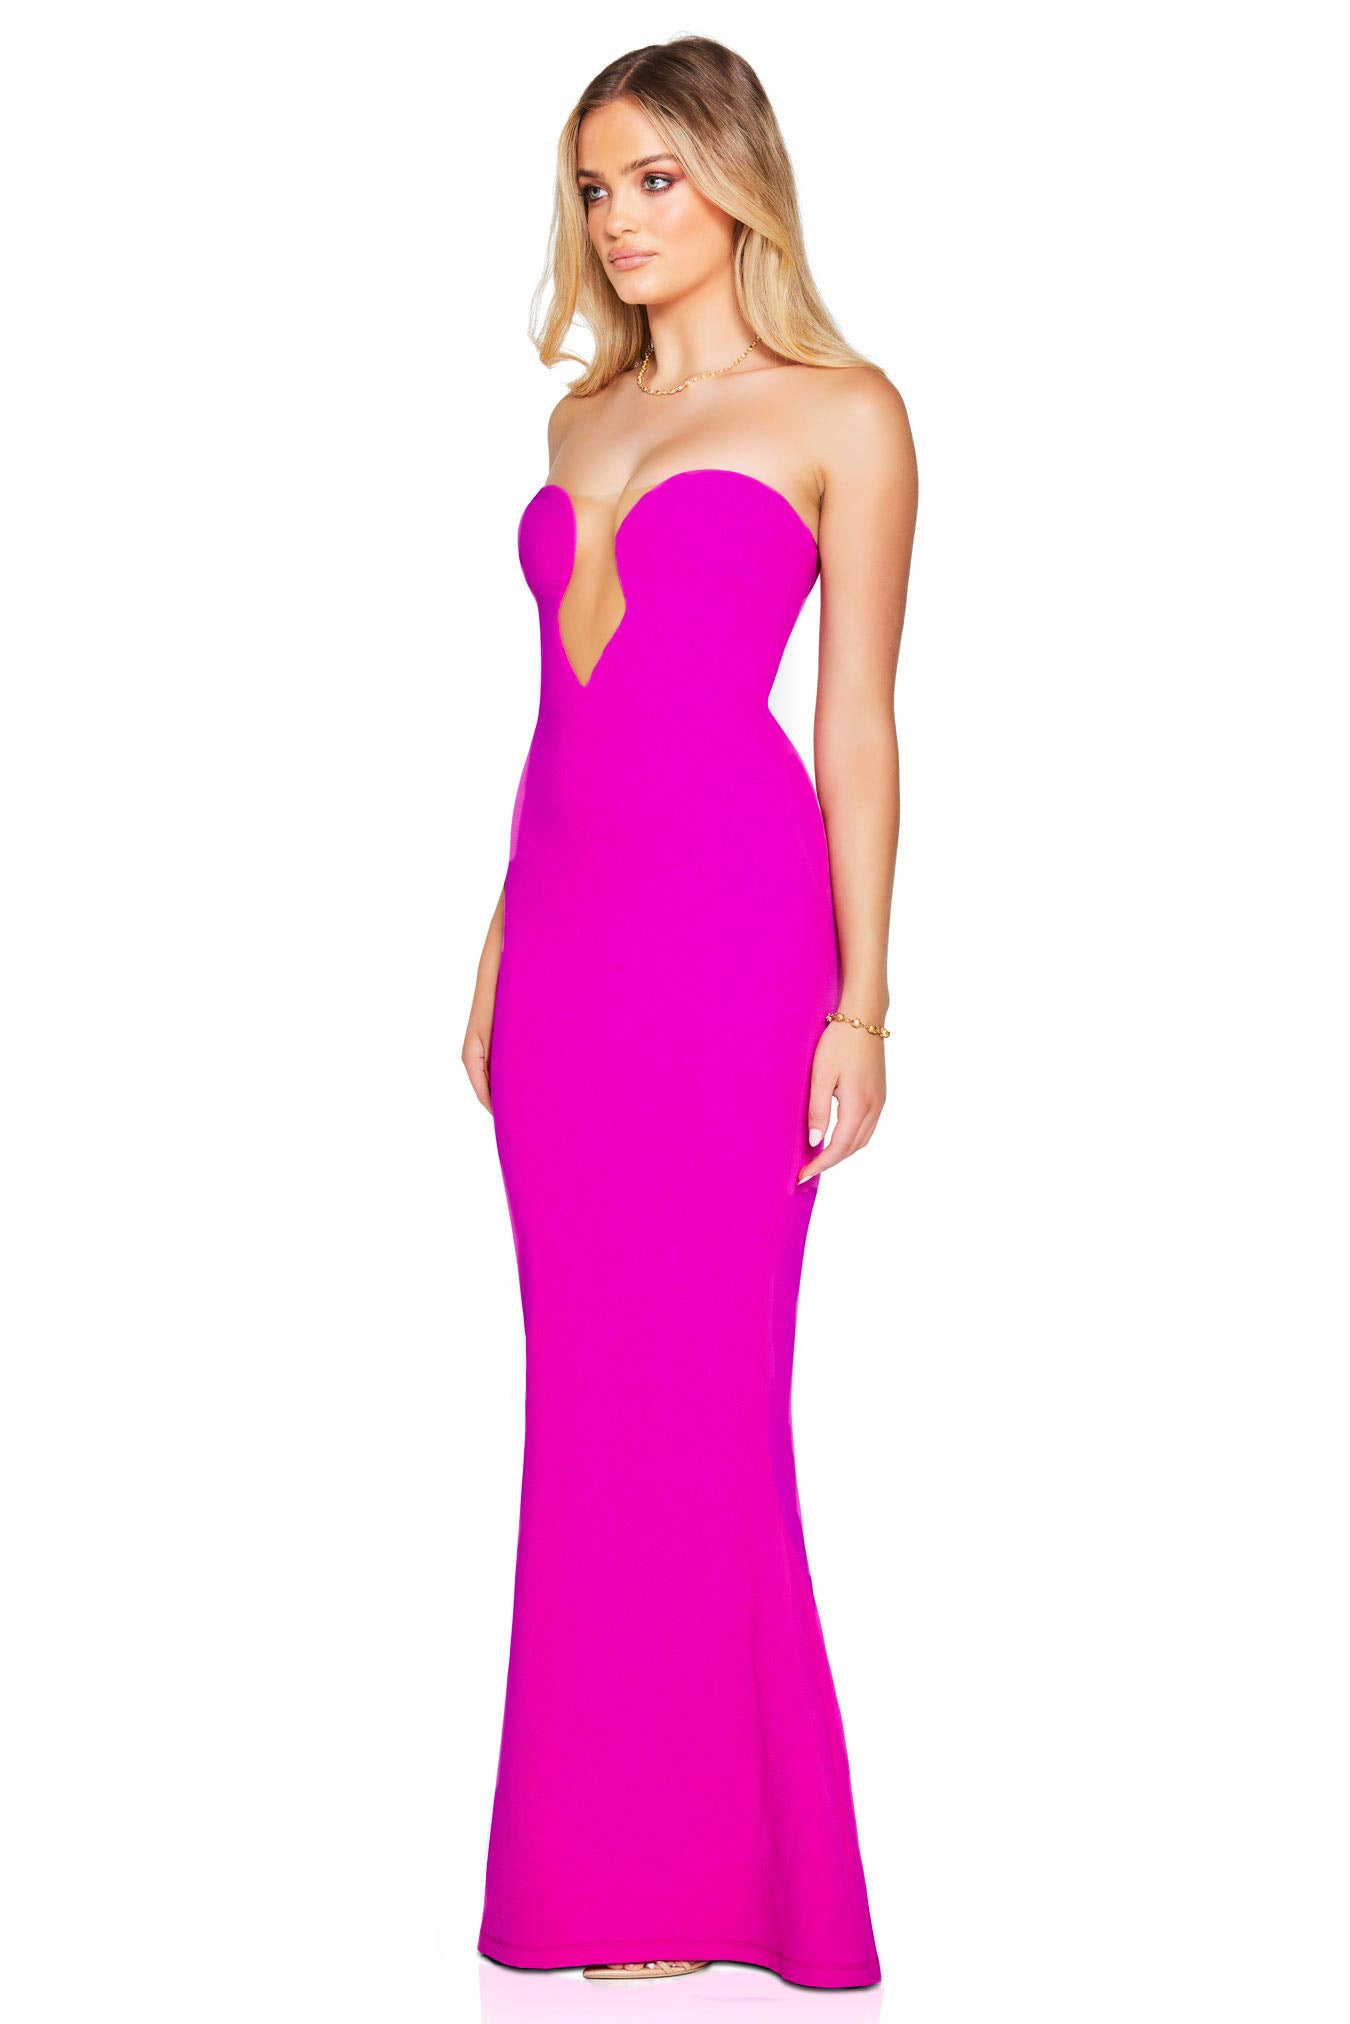 MINX GOWN ELECTRIC PINK